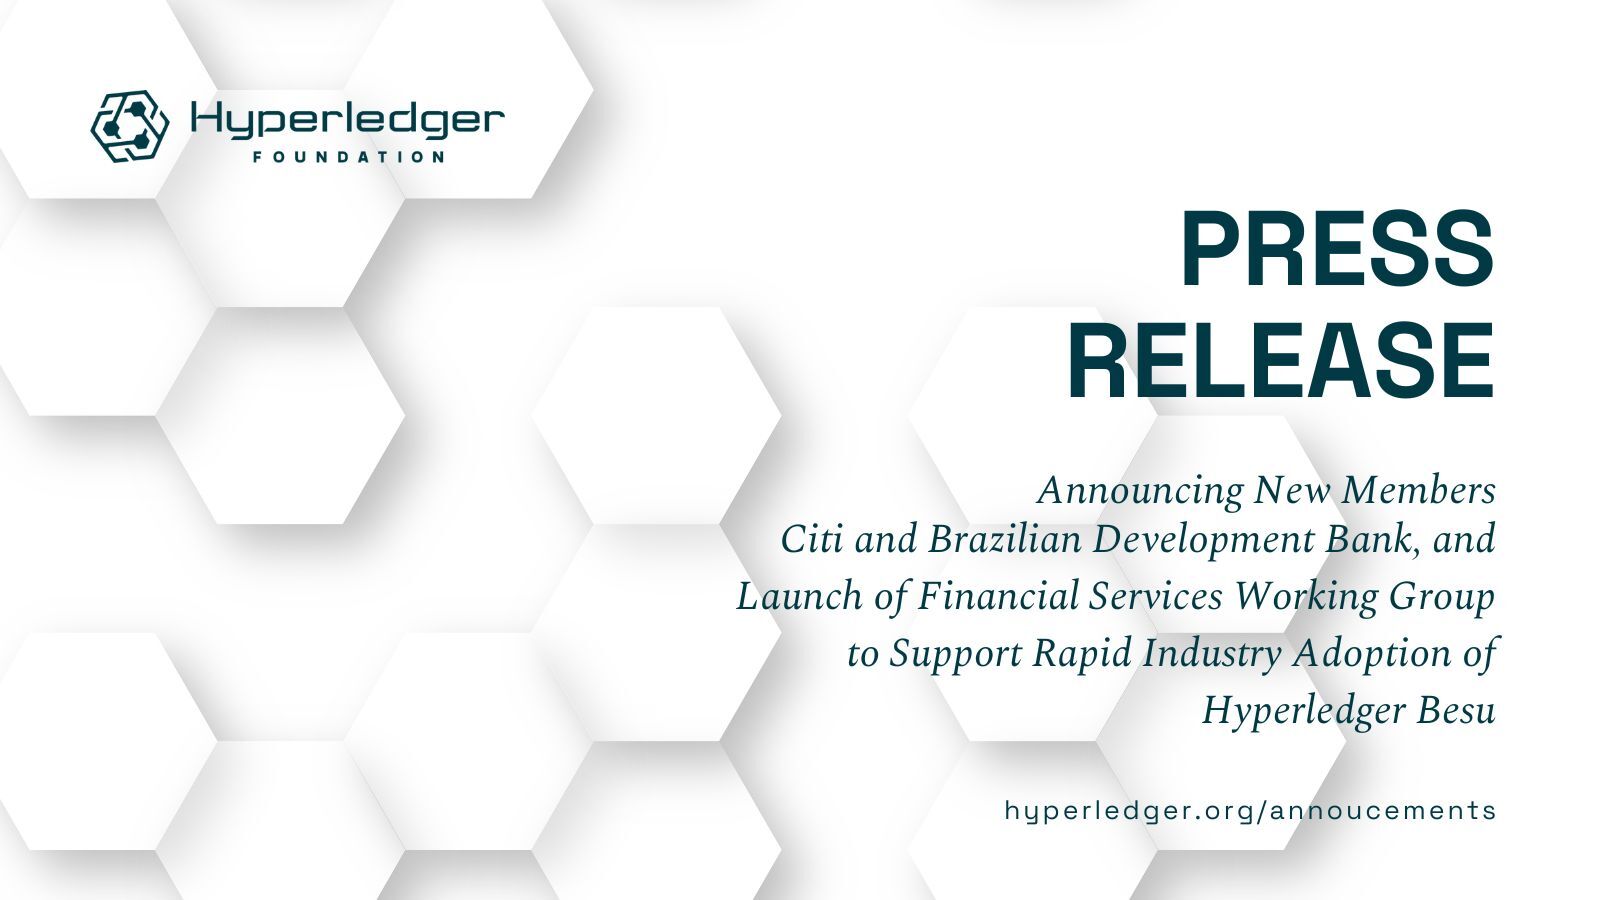 Hyperledger Foundation Adds Citi and Brazilian Development Bank as New Members; Launches Financial Services Working Group to Support Rapid Industry Adoption of Hyperledger Besu